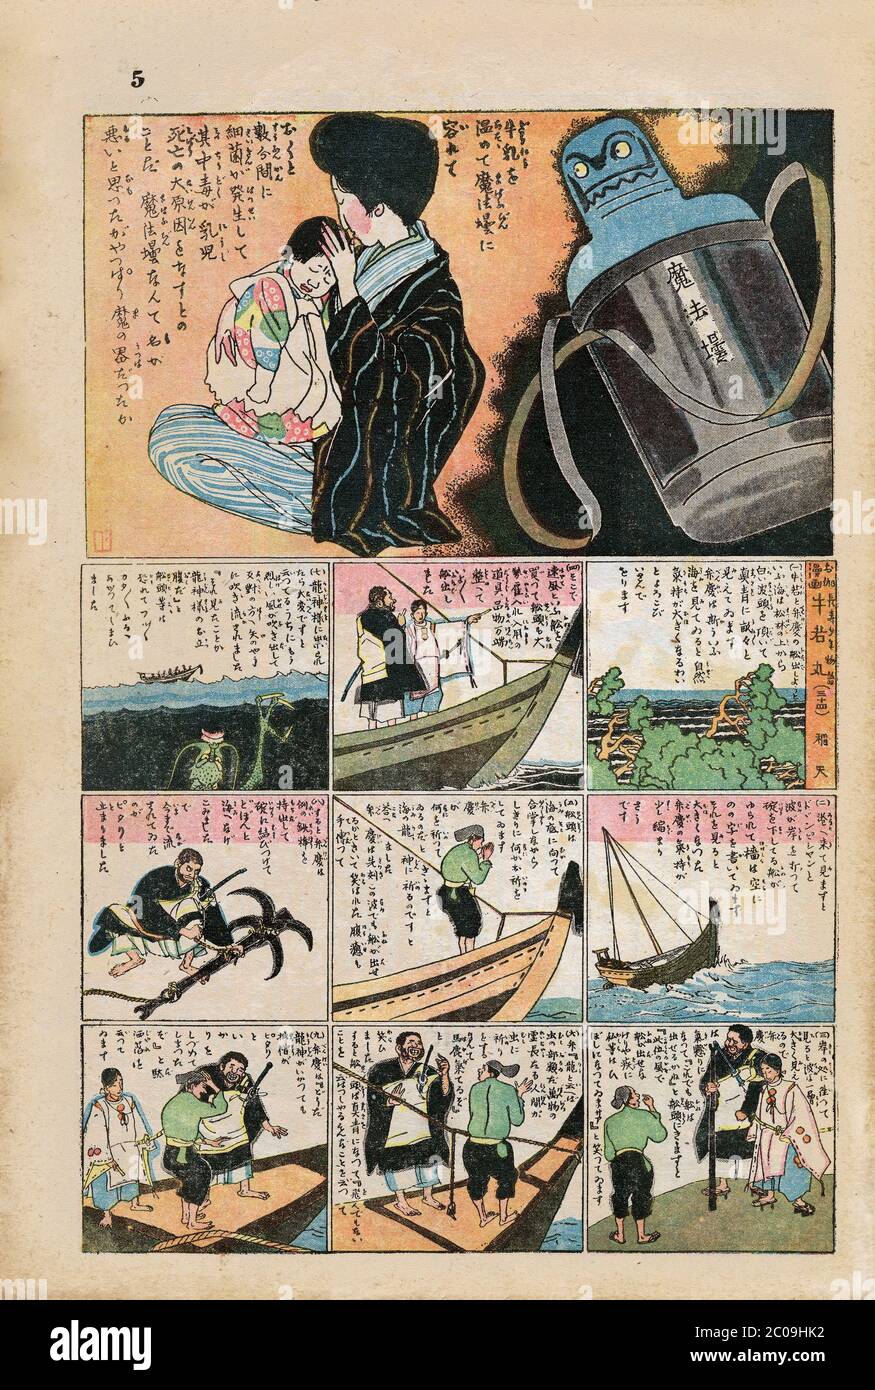 [ 1920s Japan - Jiji Manga Comics 263 ] — Jiji Manga (時事漫画), a comics supplement developed by famed Japanese artist Kitazawa Rakuten (北澤 保次, 1876–1955), often called the 'father of manga'. Issue 263 of May 10, 1926 (Taisho 15).   Jiji manga was first published by daily newspaper Jiji Shinpo (時事新報) in January 1902 (Meiji 35). It grew into a full-color Sunday supplement in the 1920s. Publication ended in October 1932 (Showa 7).  Color lithograph on paper.   20th century vintage newspaper. Stock Photo